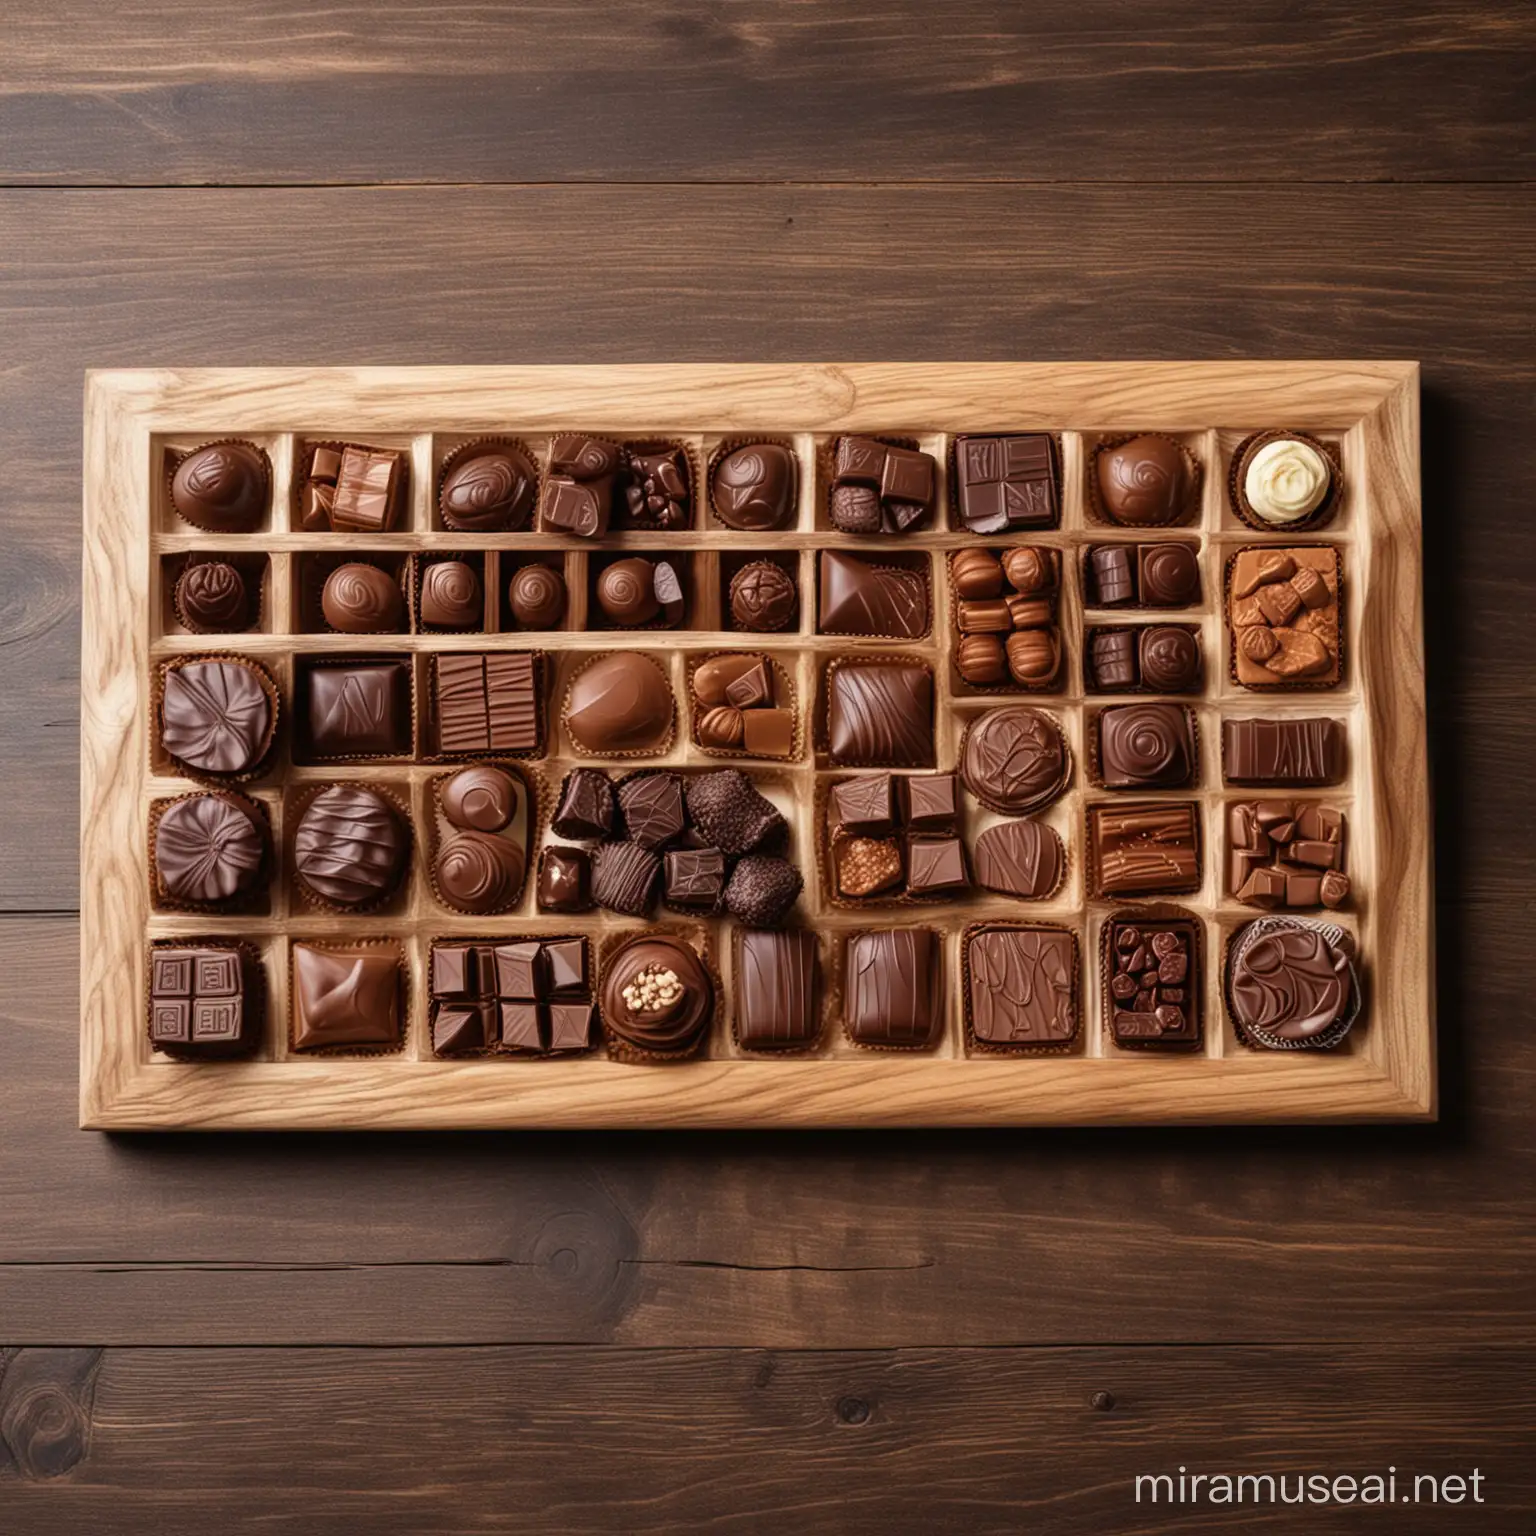 Beautiful board of wood with chocolates. Image Size 1200 x 600 pixels 